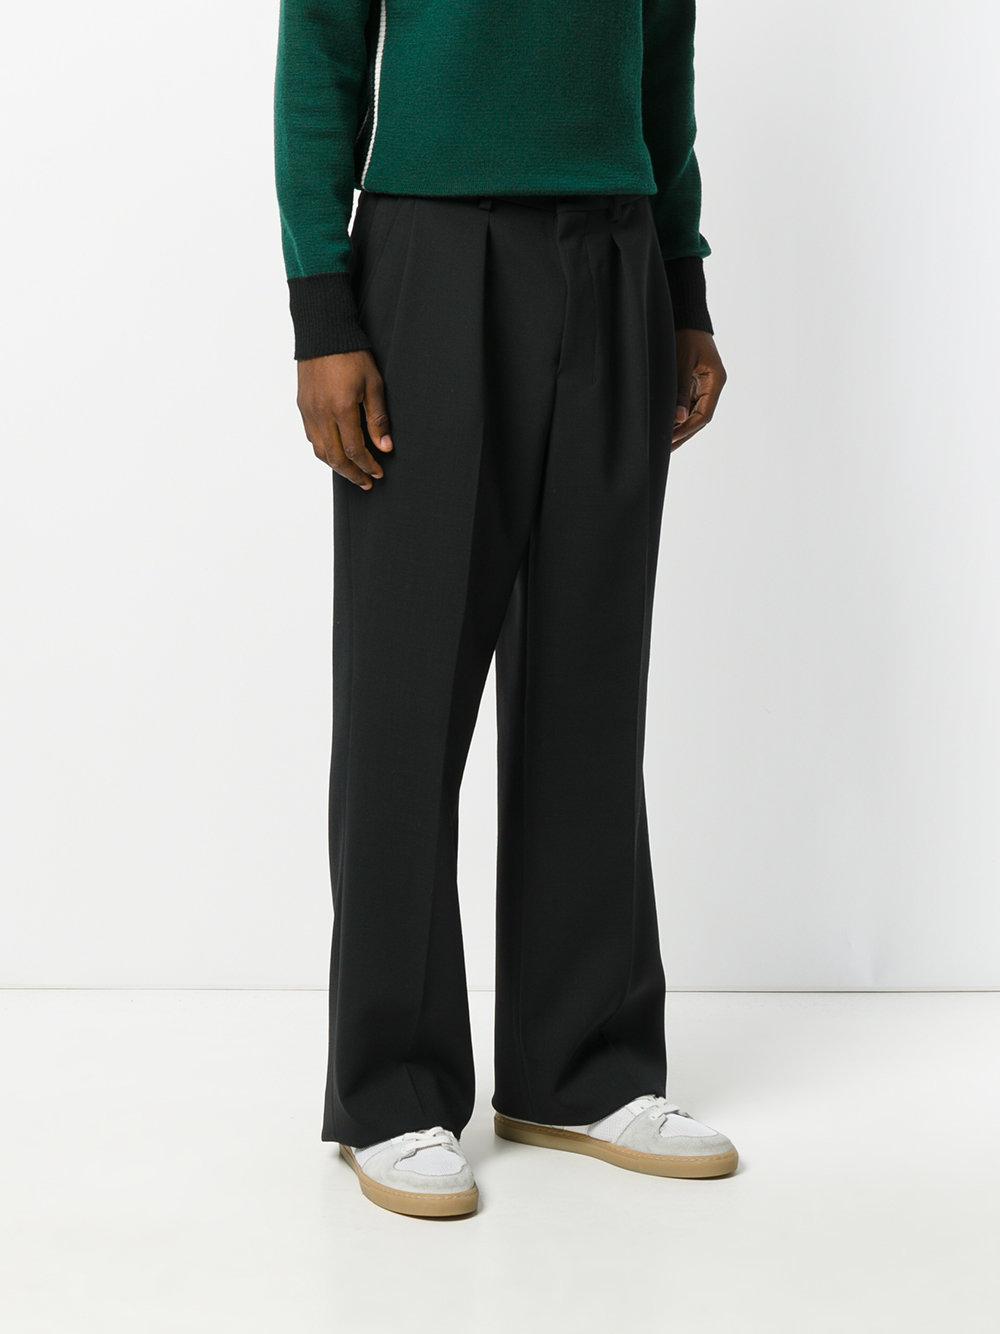 Lyst - Ami Wide Leg Tailored Trousers in Black for Men